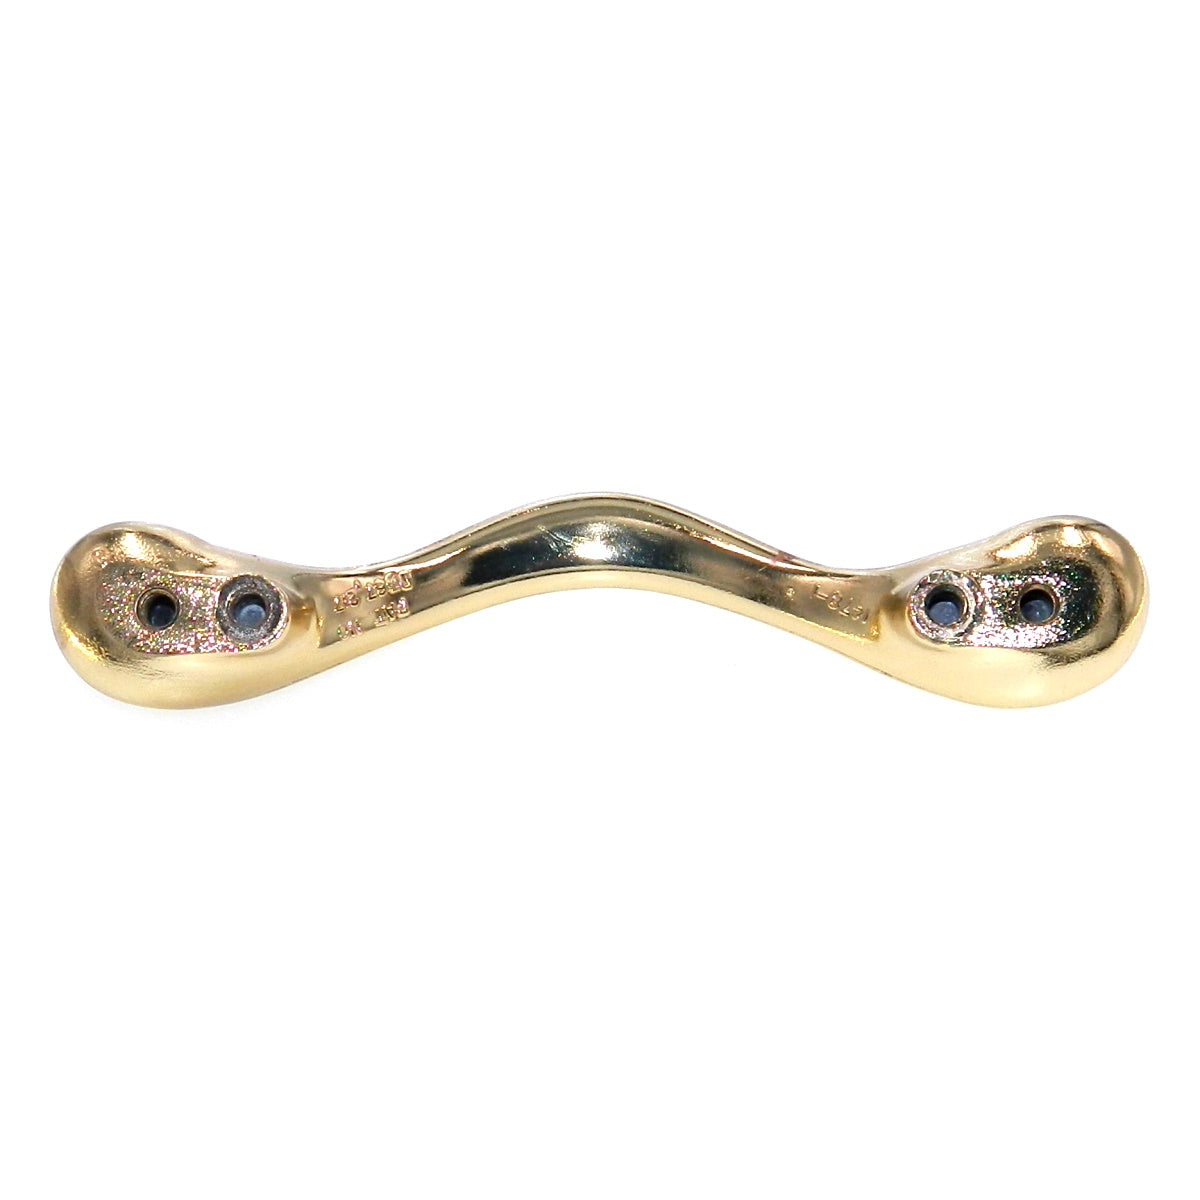 Amerock Expressions BP1478-O74 Sterling Brass 3", 3 3/4"cc Cabinet Handle Pull